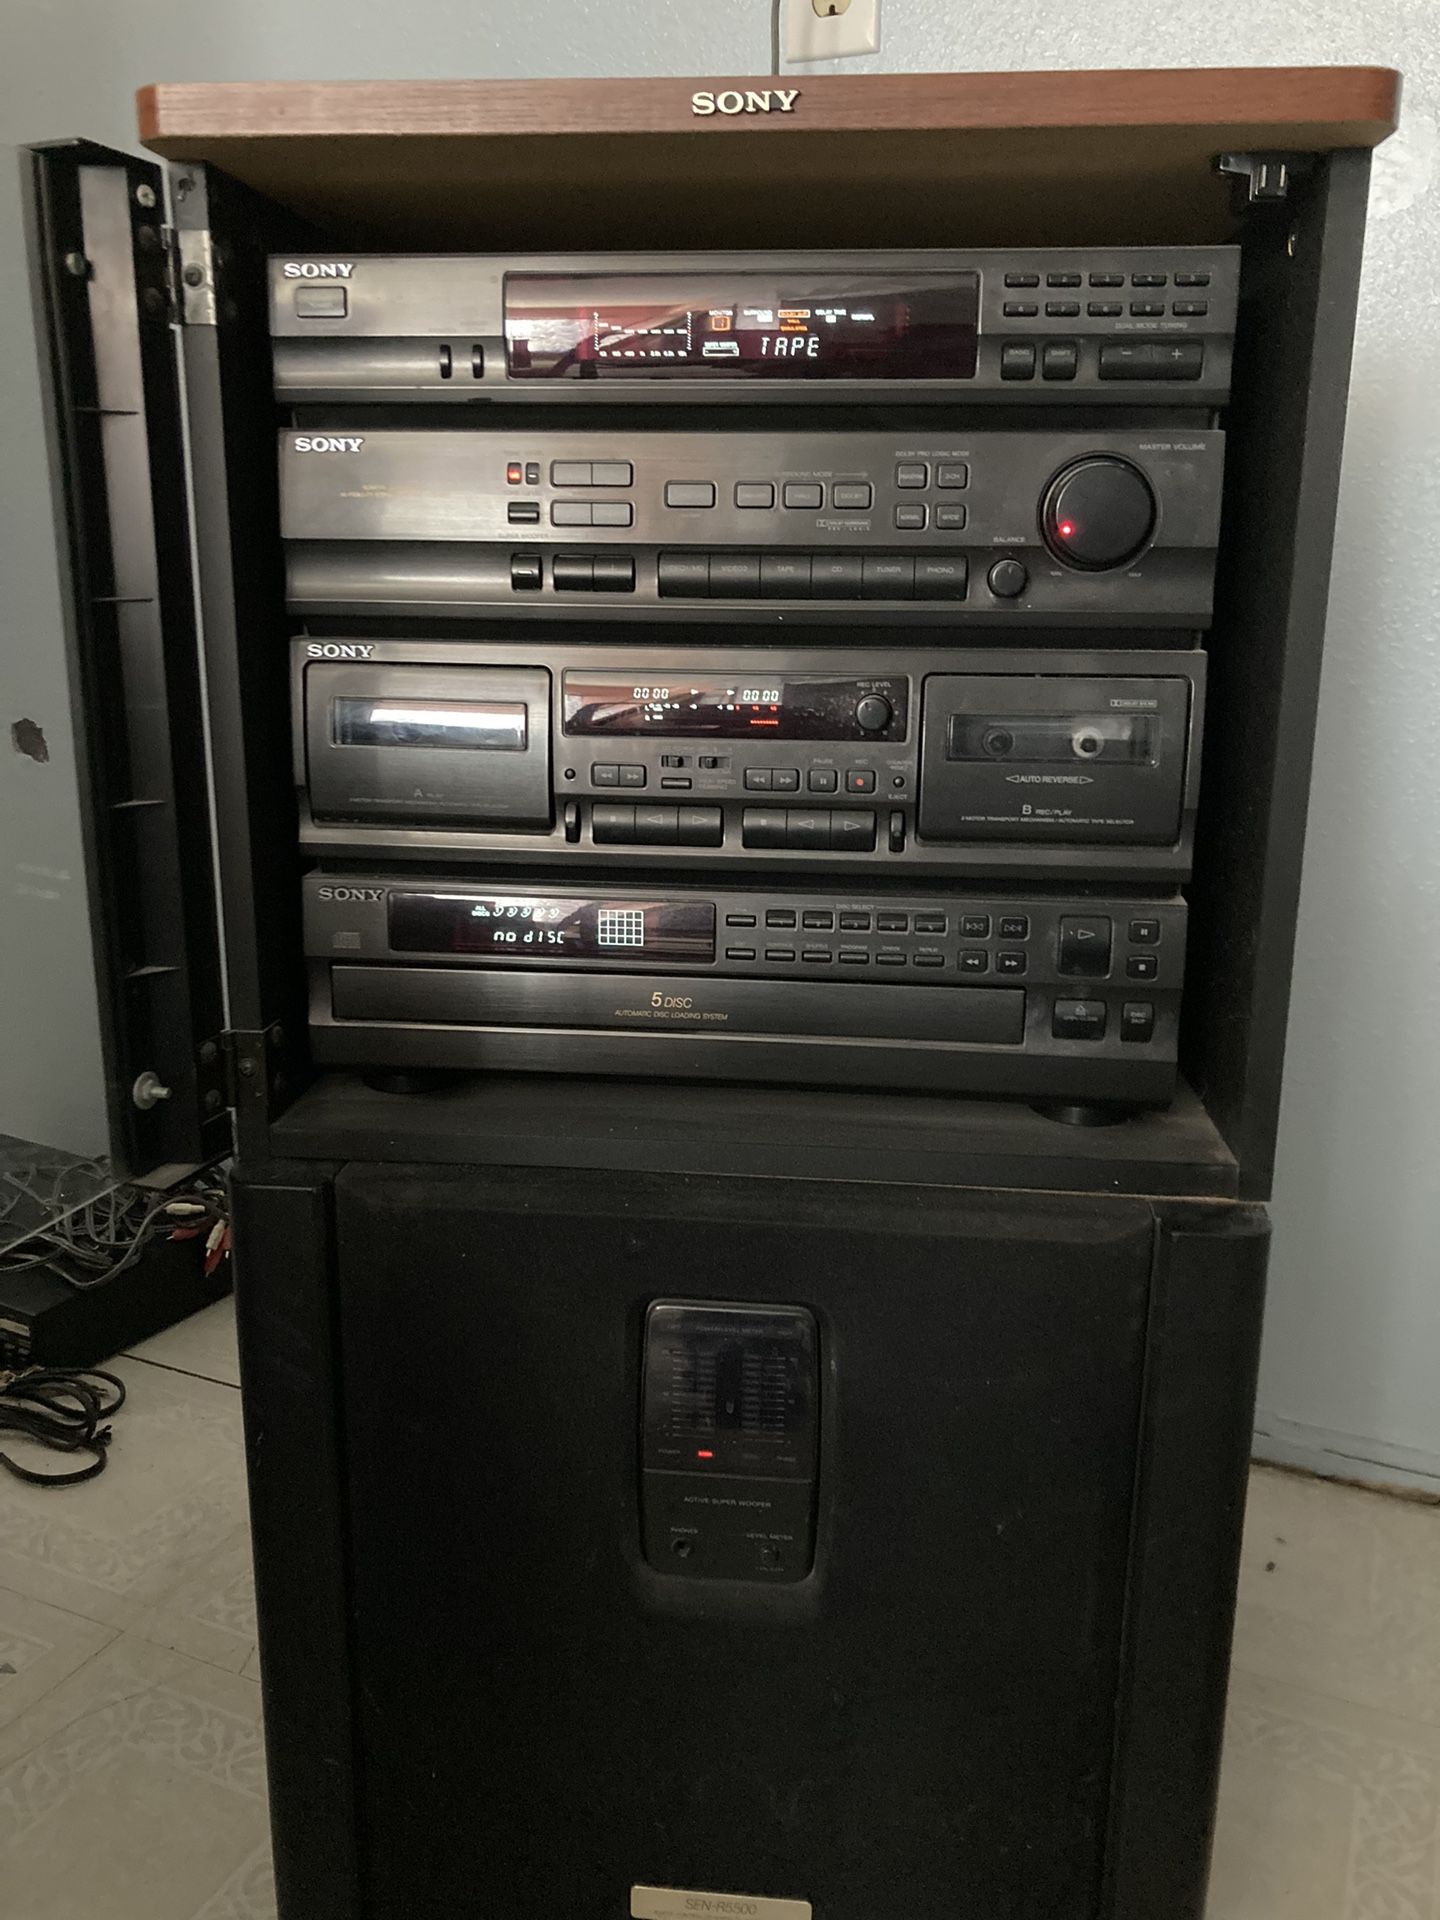 Sony Antique Stereo System